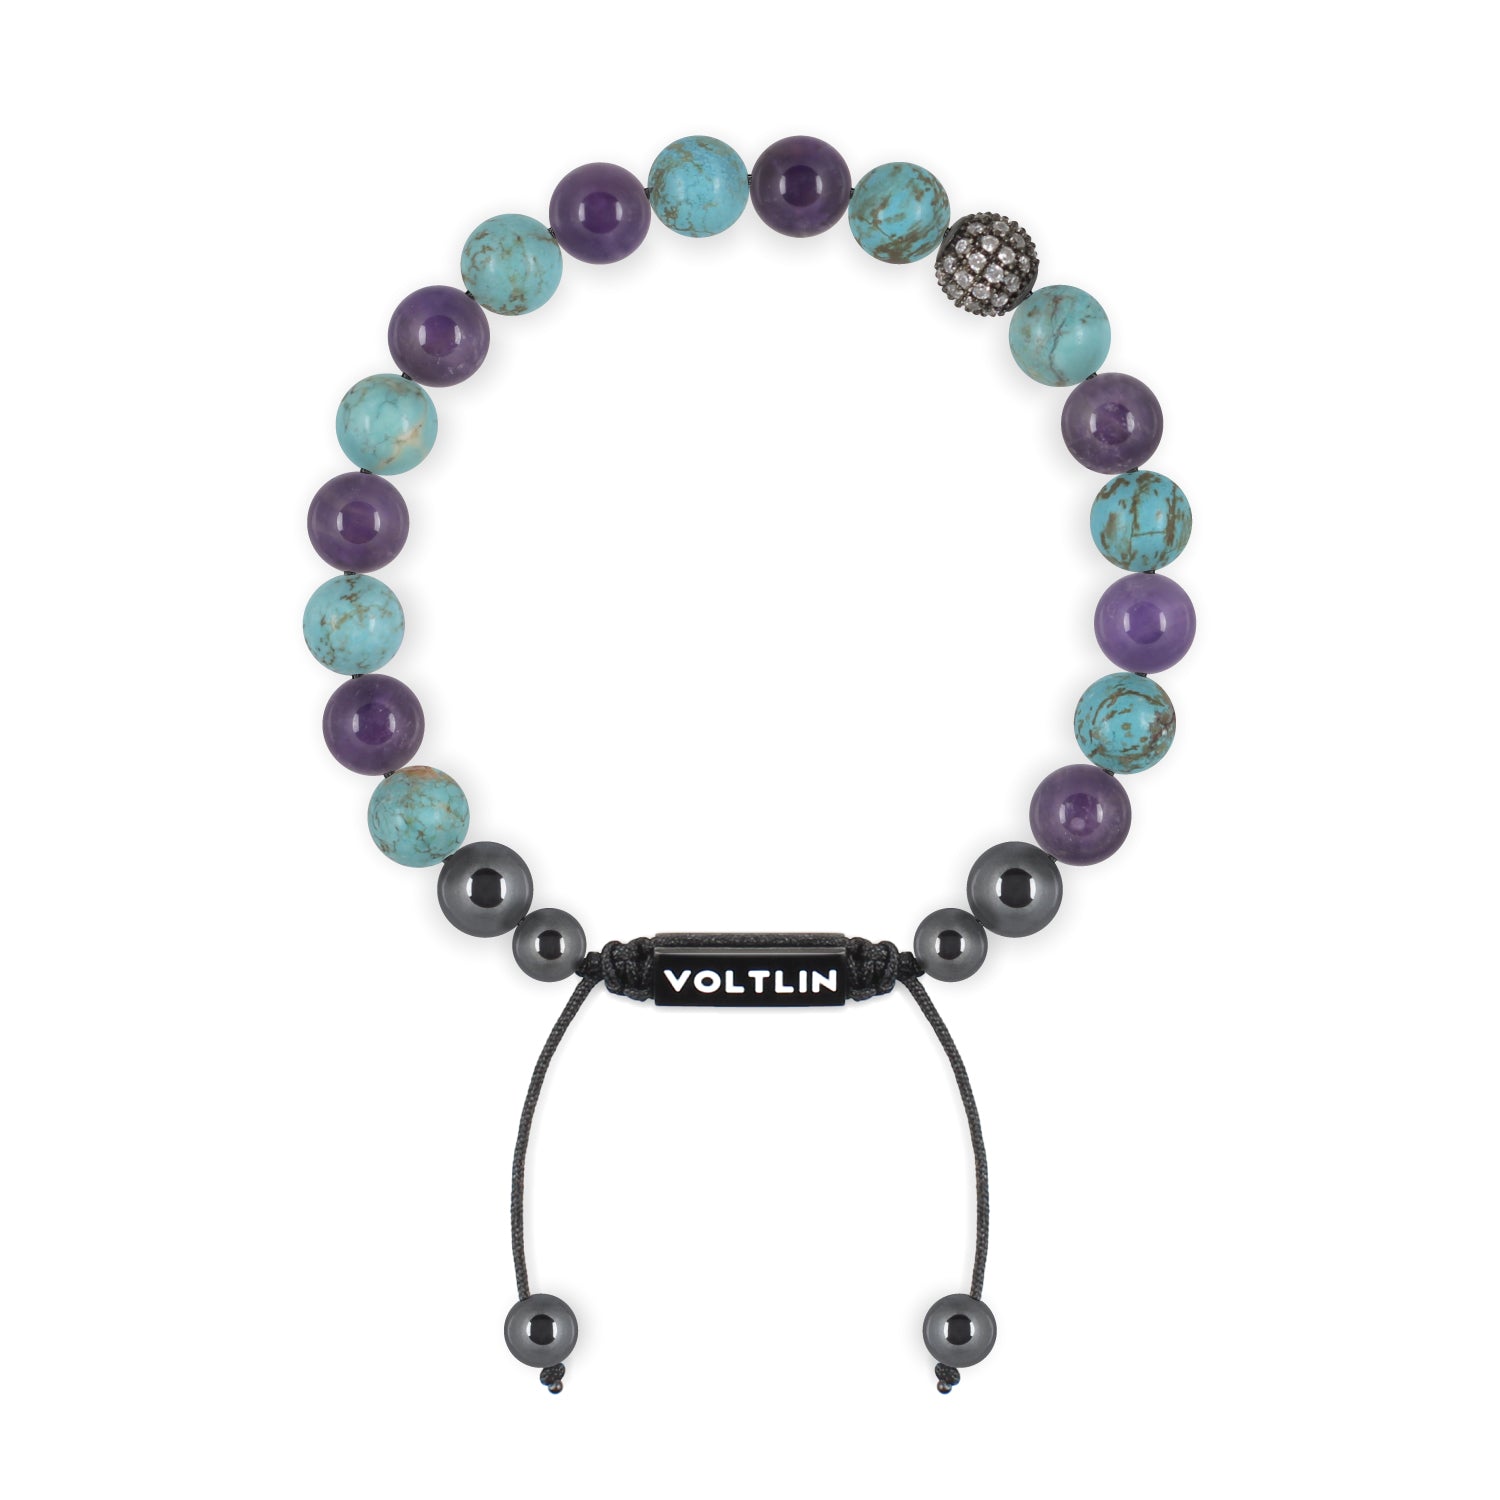 Front view of an 8mm Suicide Awareness crystal beaded shamballa bracelet with black stainless steel logo bead made by Voltlin